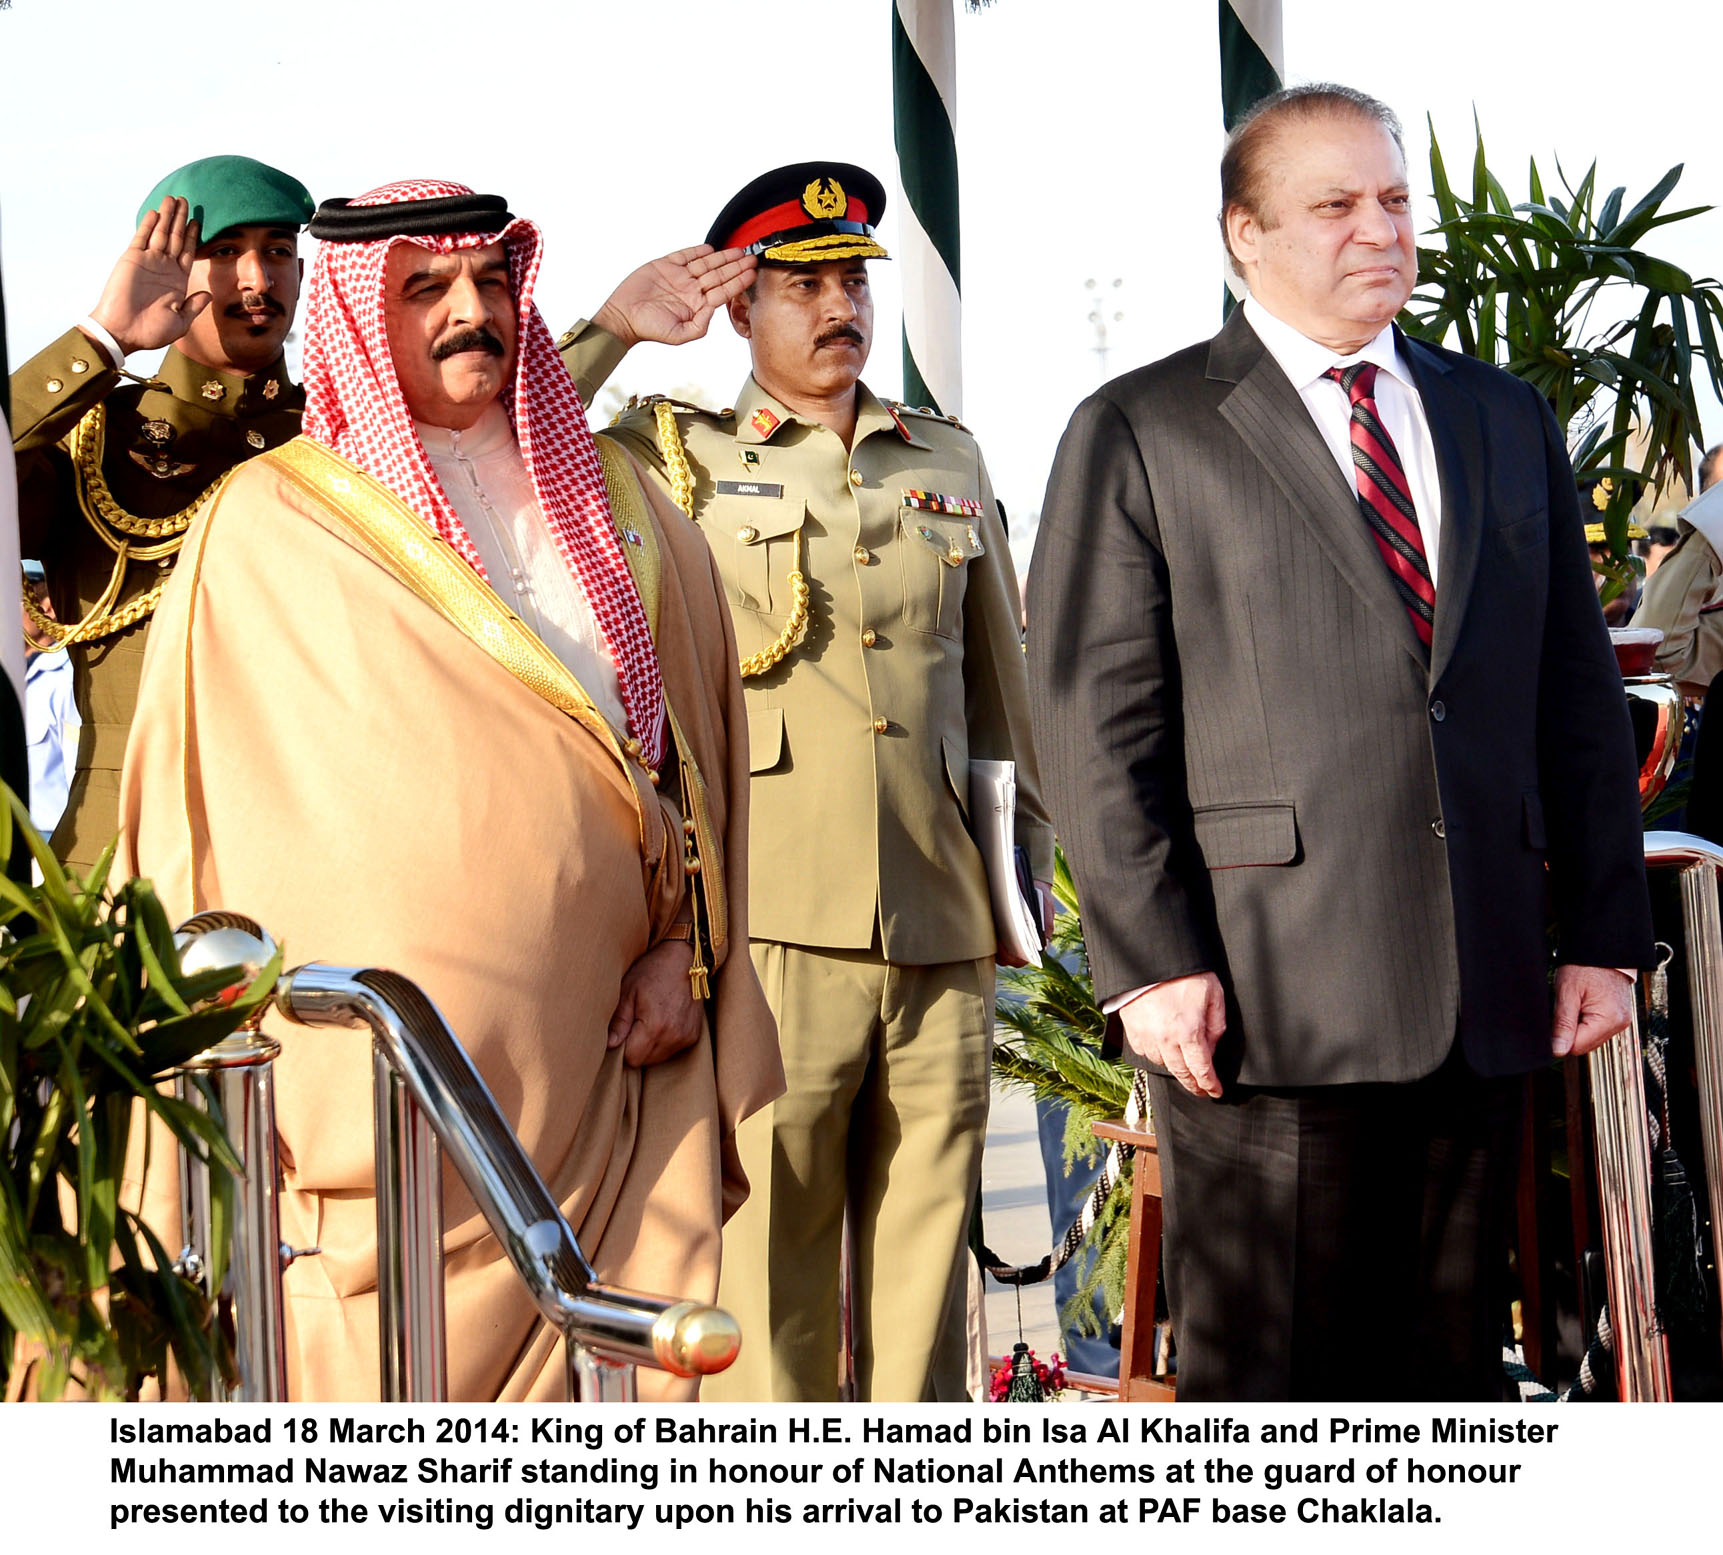 prime minister nawaz sharif r stands alongside the king of bahrain hamad bin isa al khalifa after the latter arrived in pakistan on tuesday photo pid